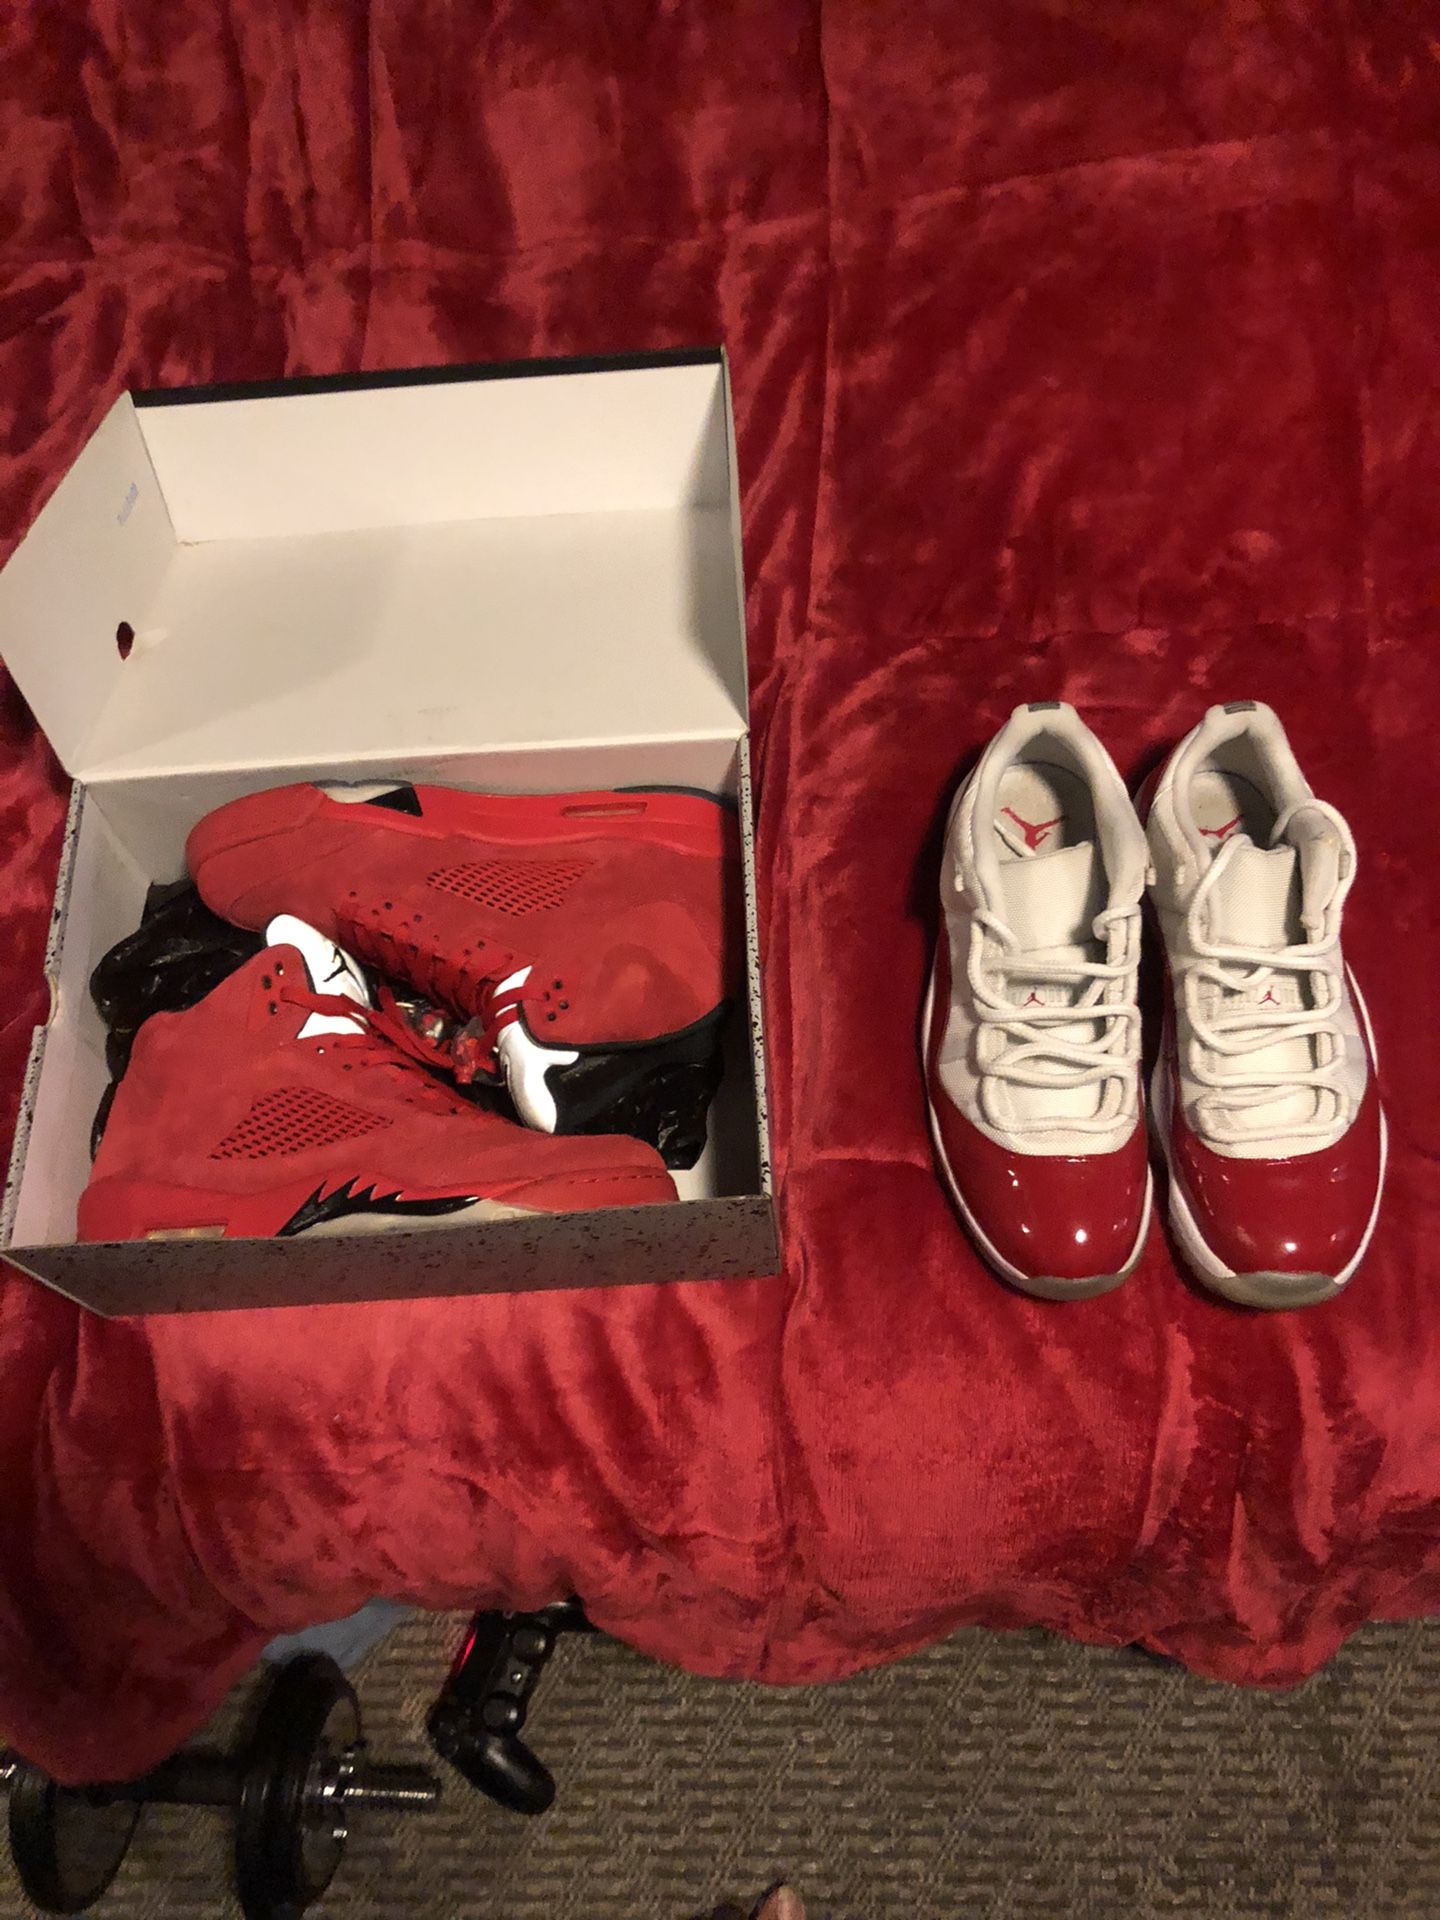 Cherry Jordan 11’s and Red Jordan Suede 5’s Both For $250